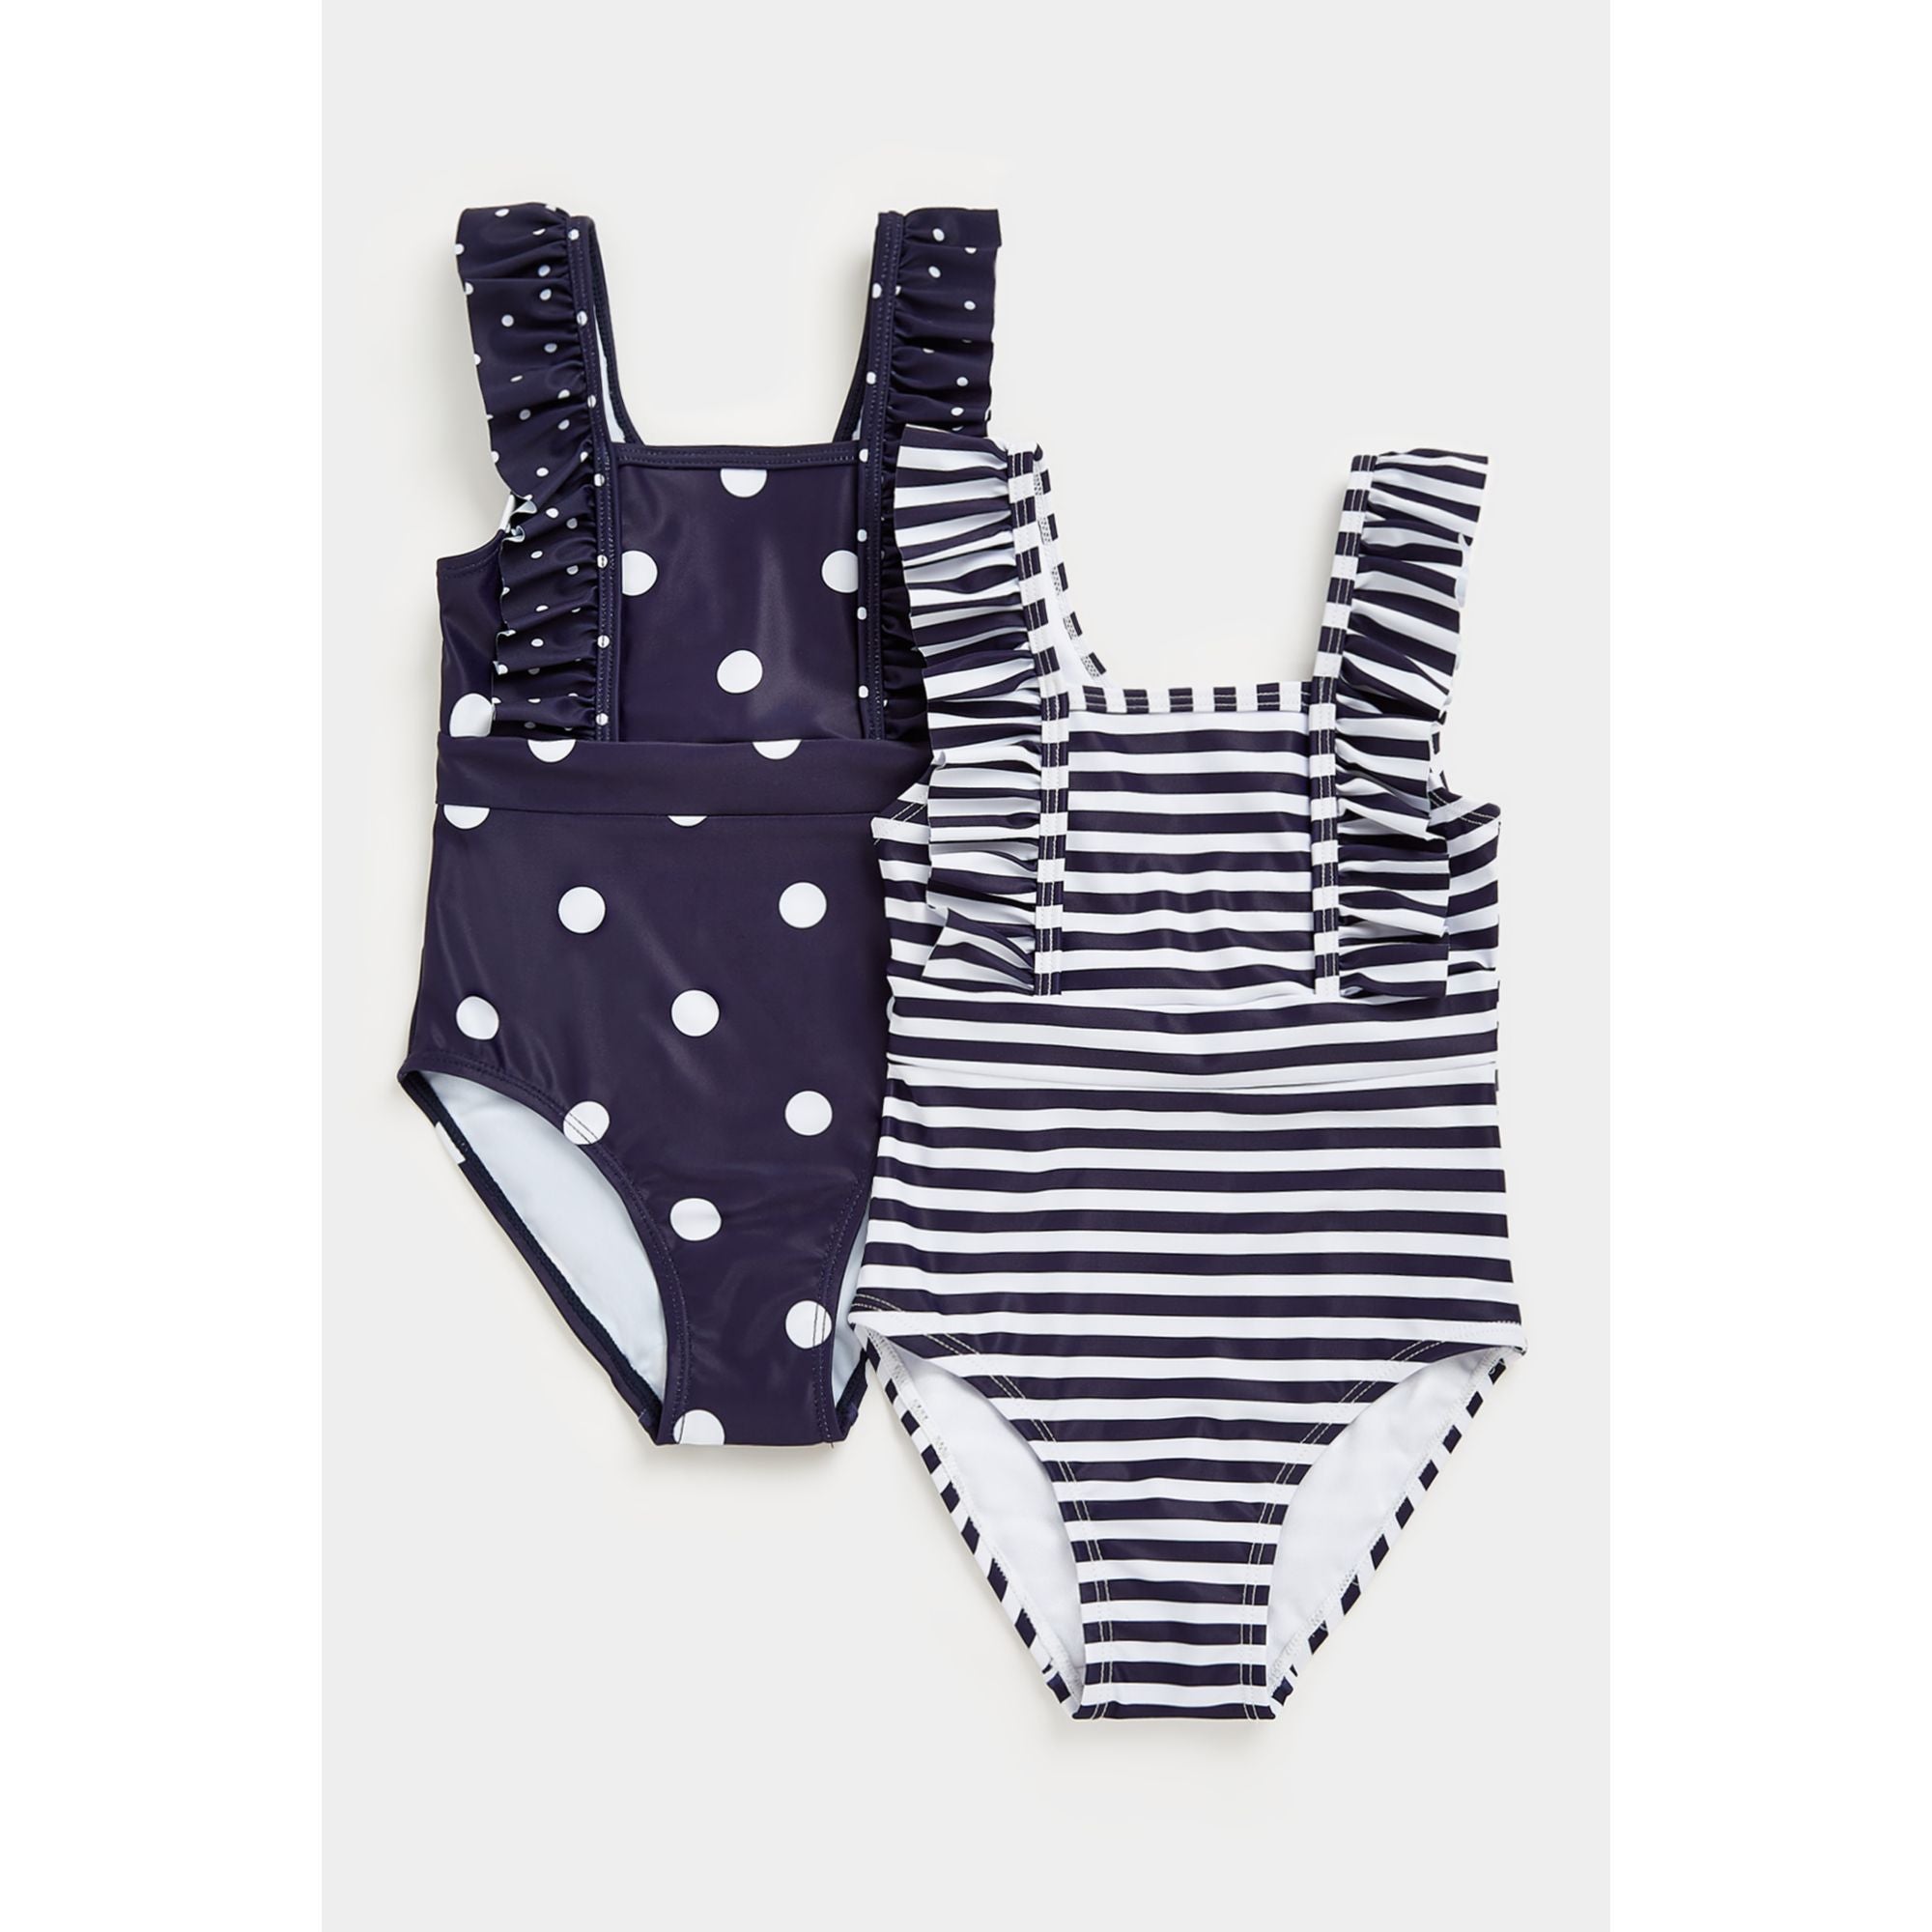 Mothercare Spot and Striped Swimsuits - 2 Pack